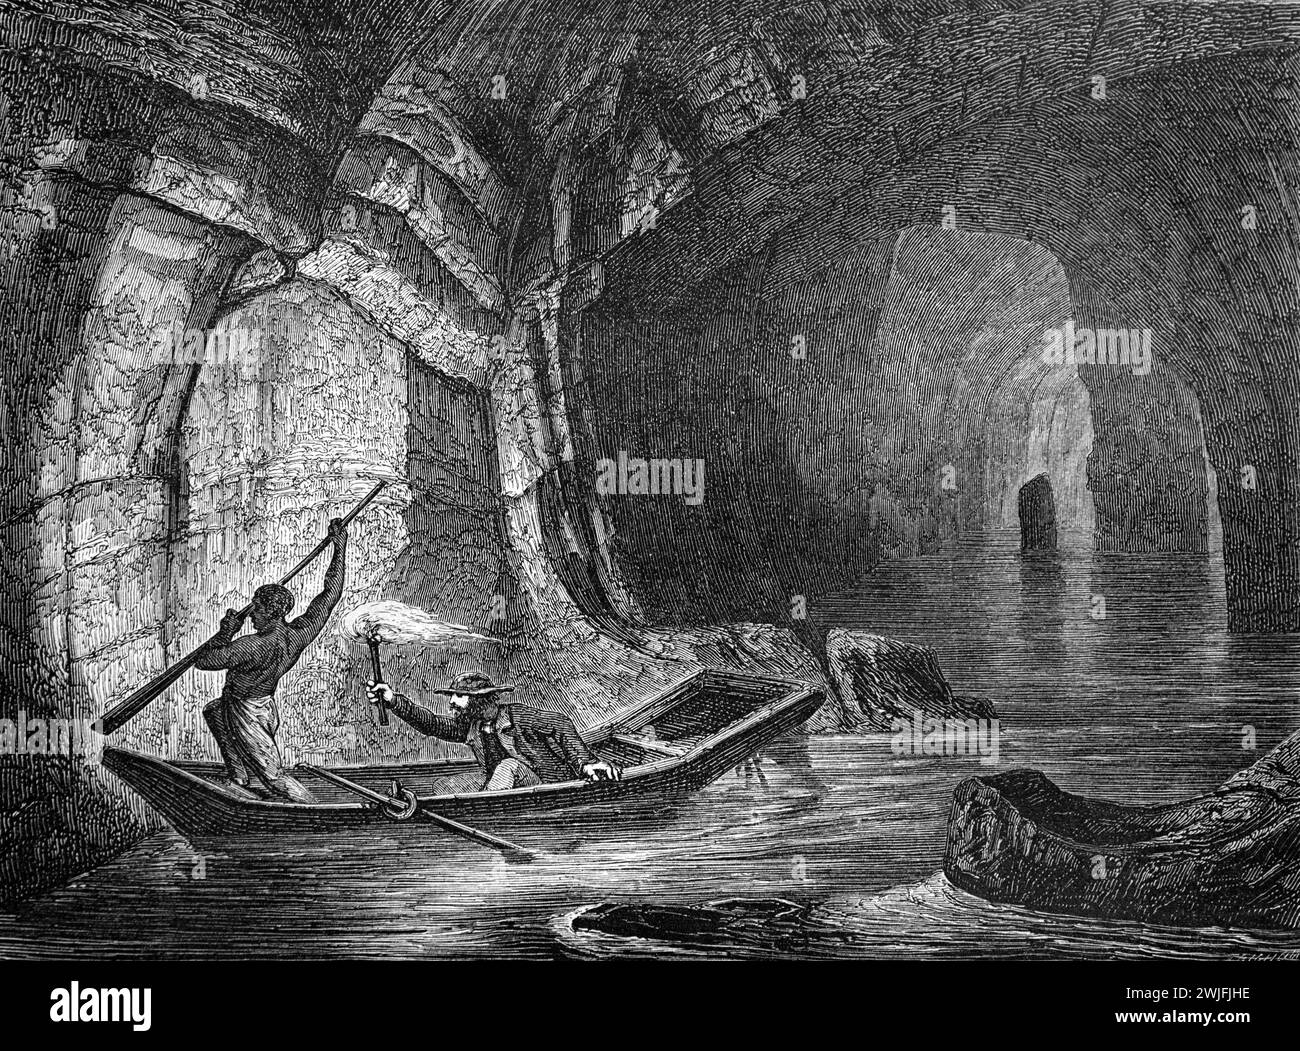 Visitors Explore the Mammoth Cave in the Mammoth Cave National Park, by Rowing Boat or Row Boat along the Subterranean Green River, Kentucky, US, USA Or United States of America. Vintage or Historic Engraving or Illustration 1863 Stock Photo